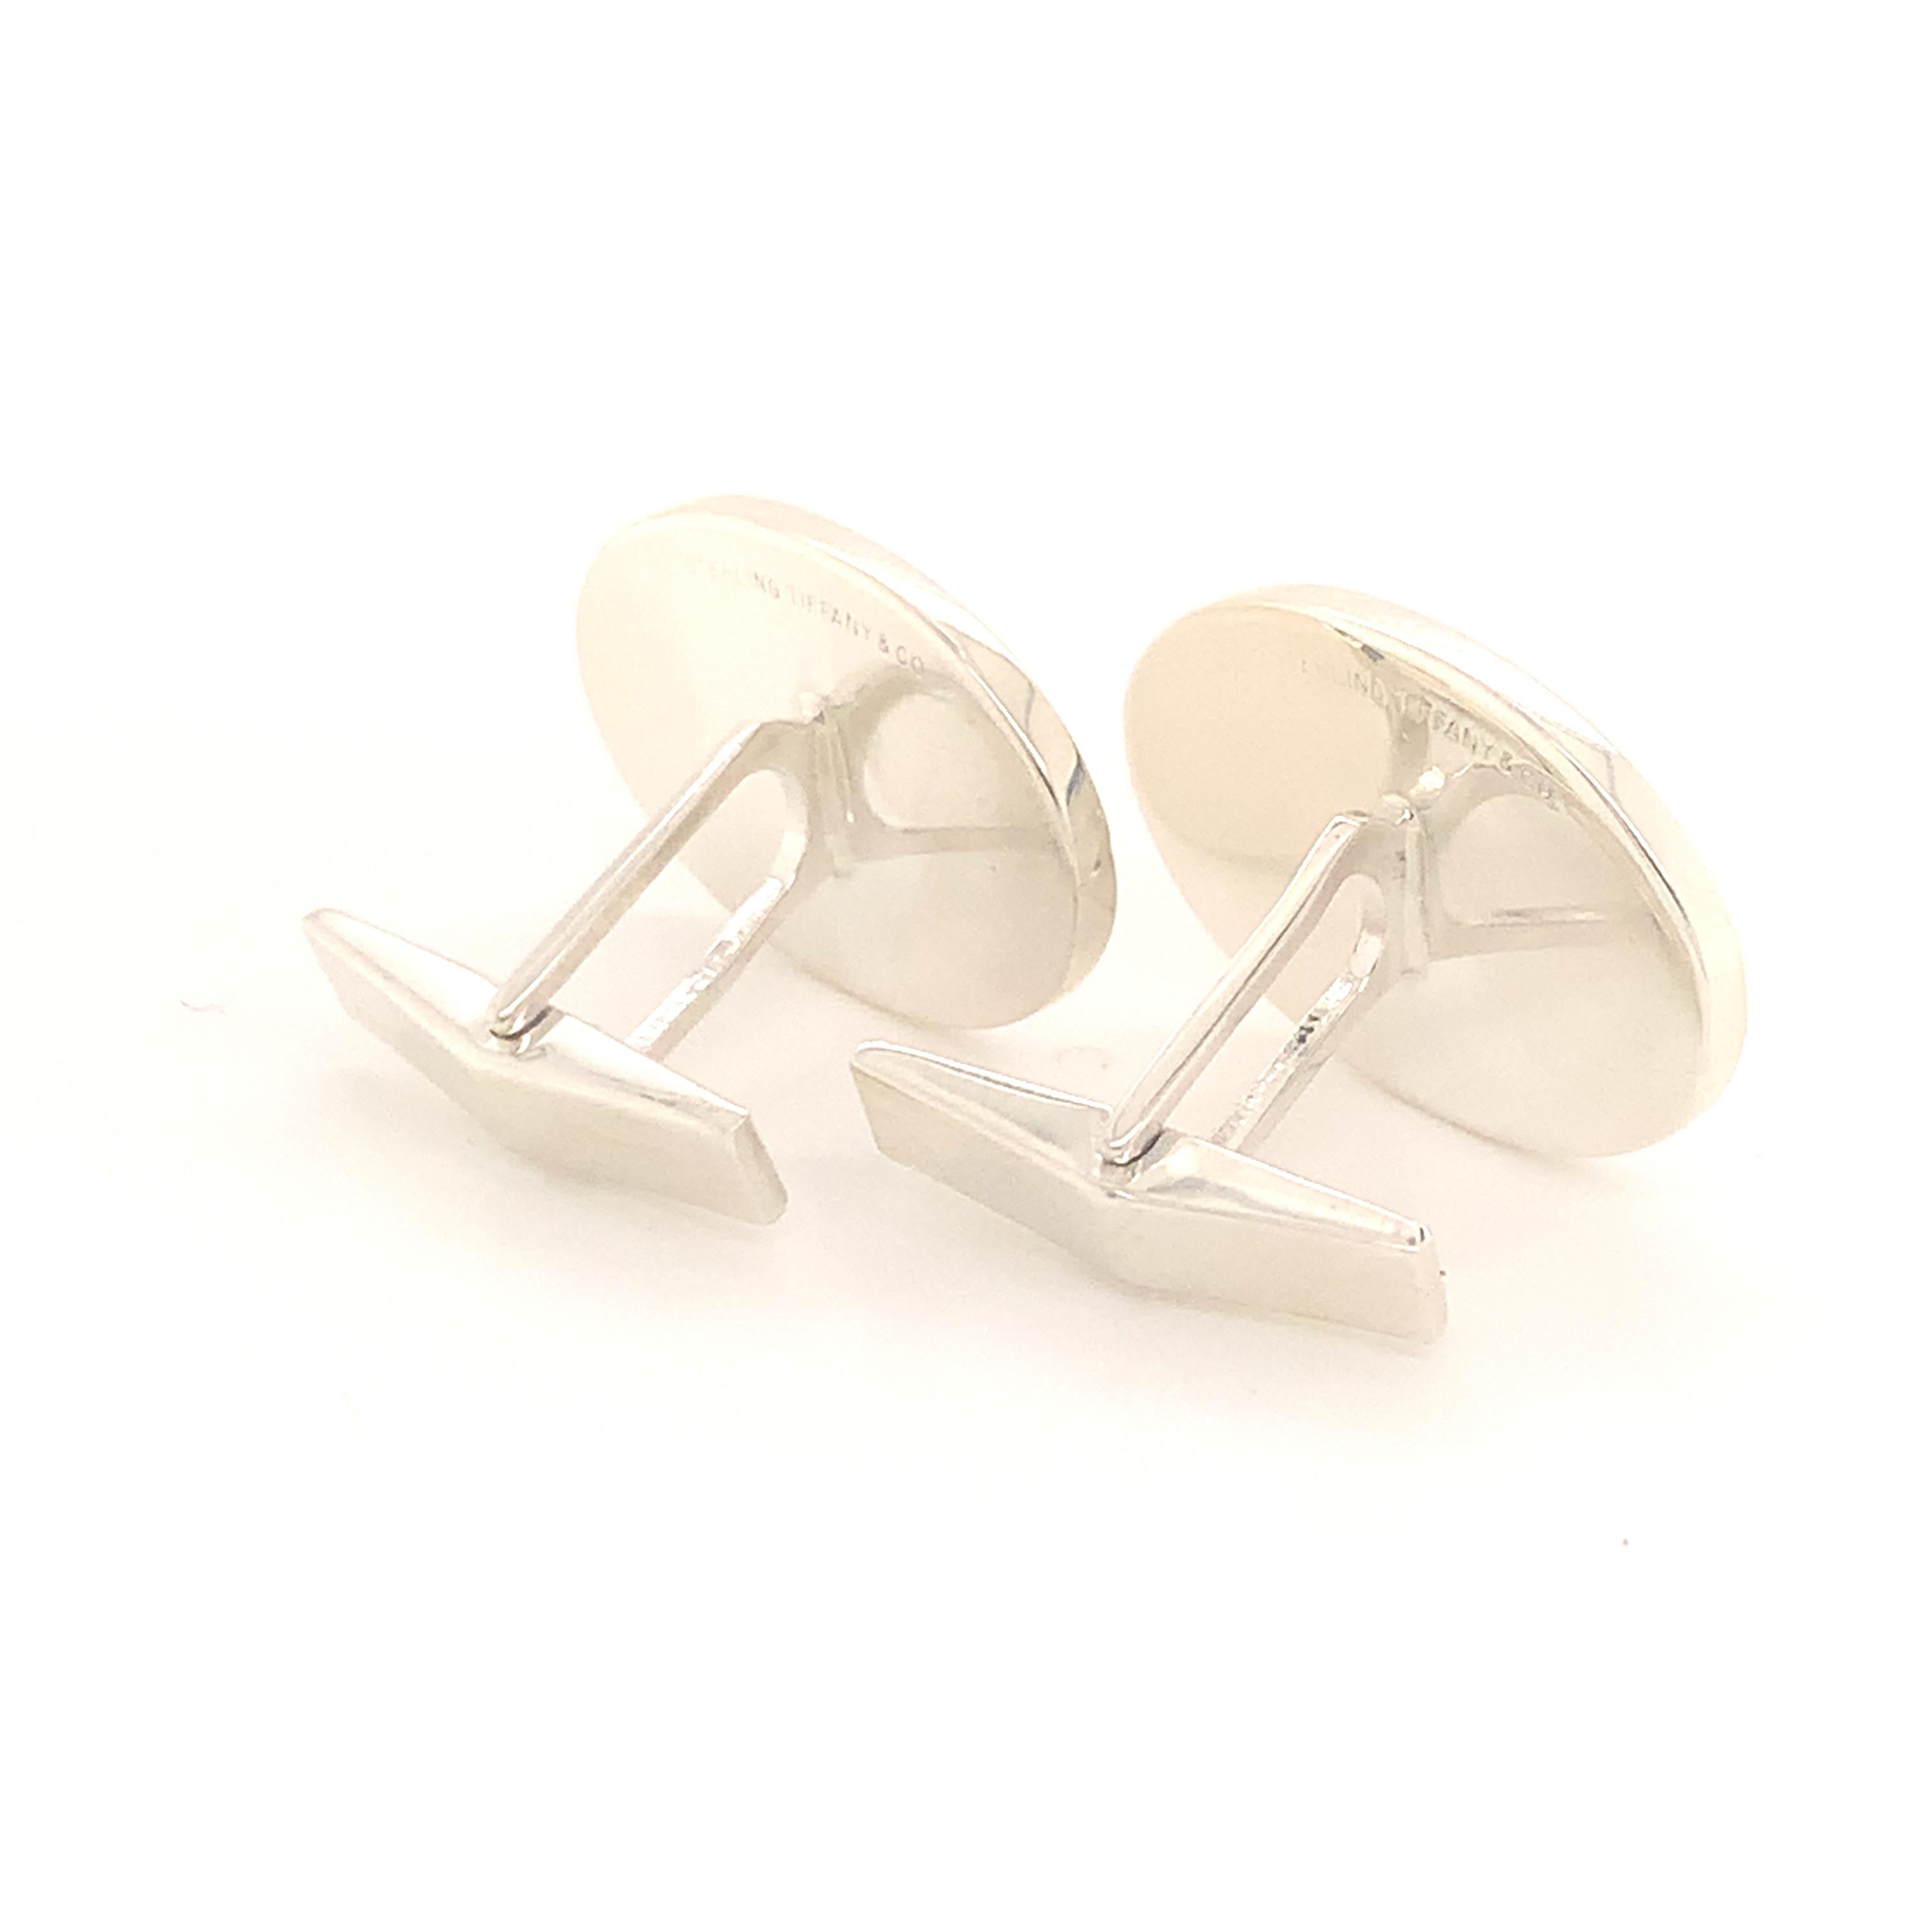 Tiffany & Co Estate Cufflinks Sterling Silver TIF32
  
The Tiffany & Co items have a natural patina As they are estate silver pieces.
 
We polish most of our estate Tiffany pieces so that they will be fresh for their new owners but many clients wish